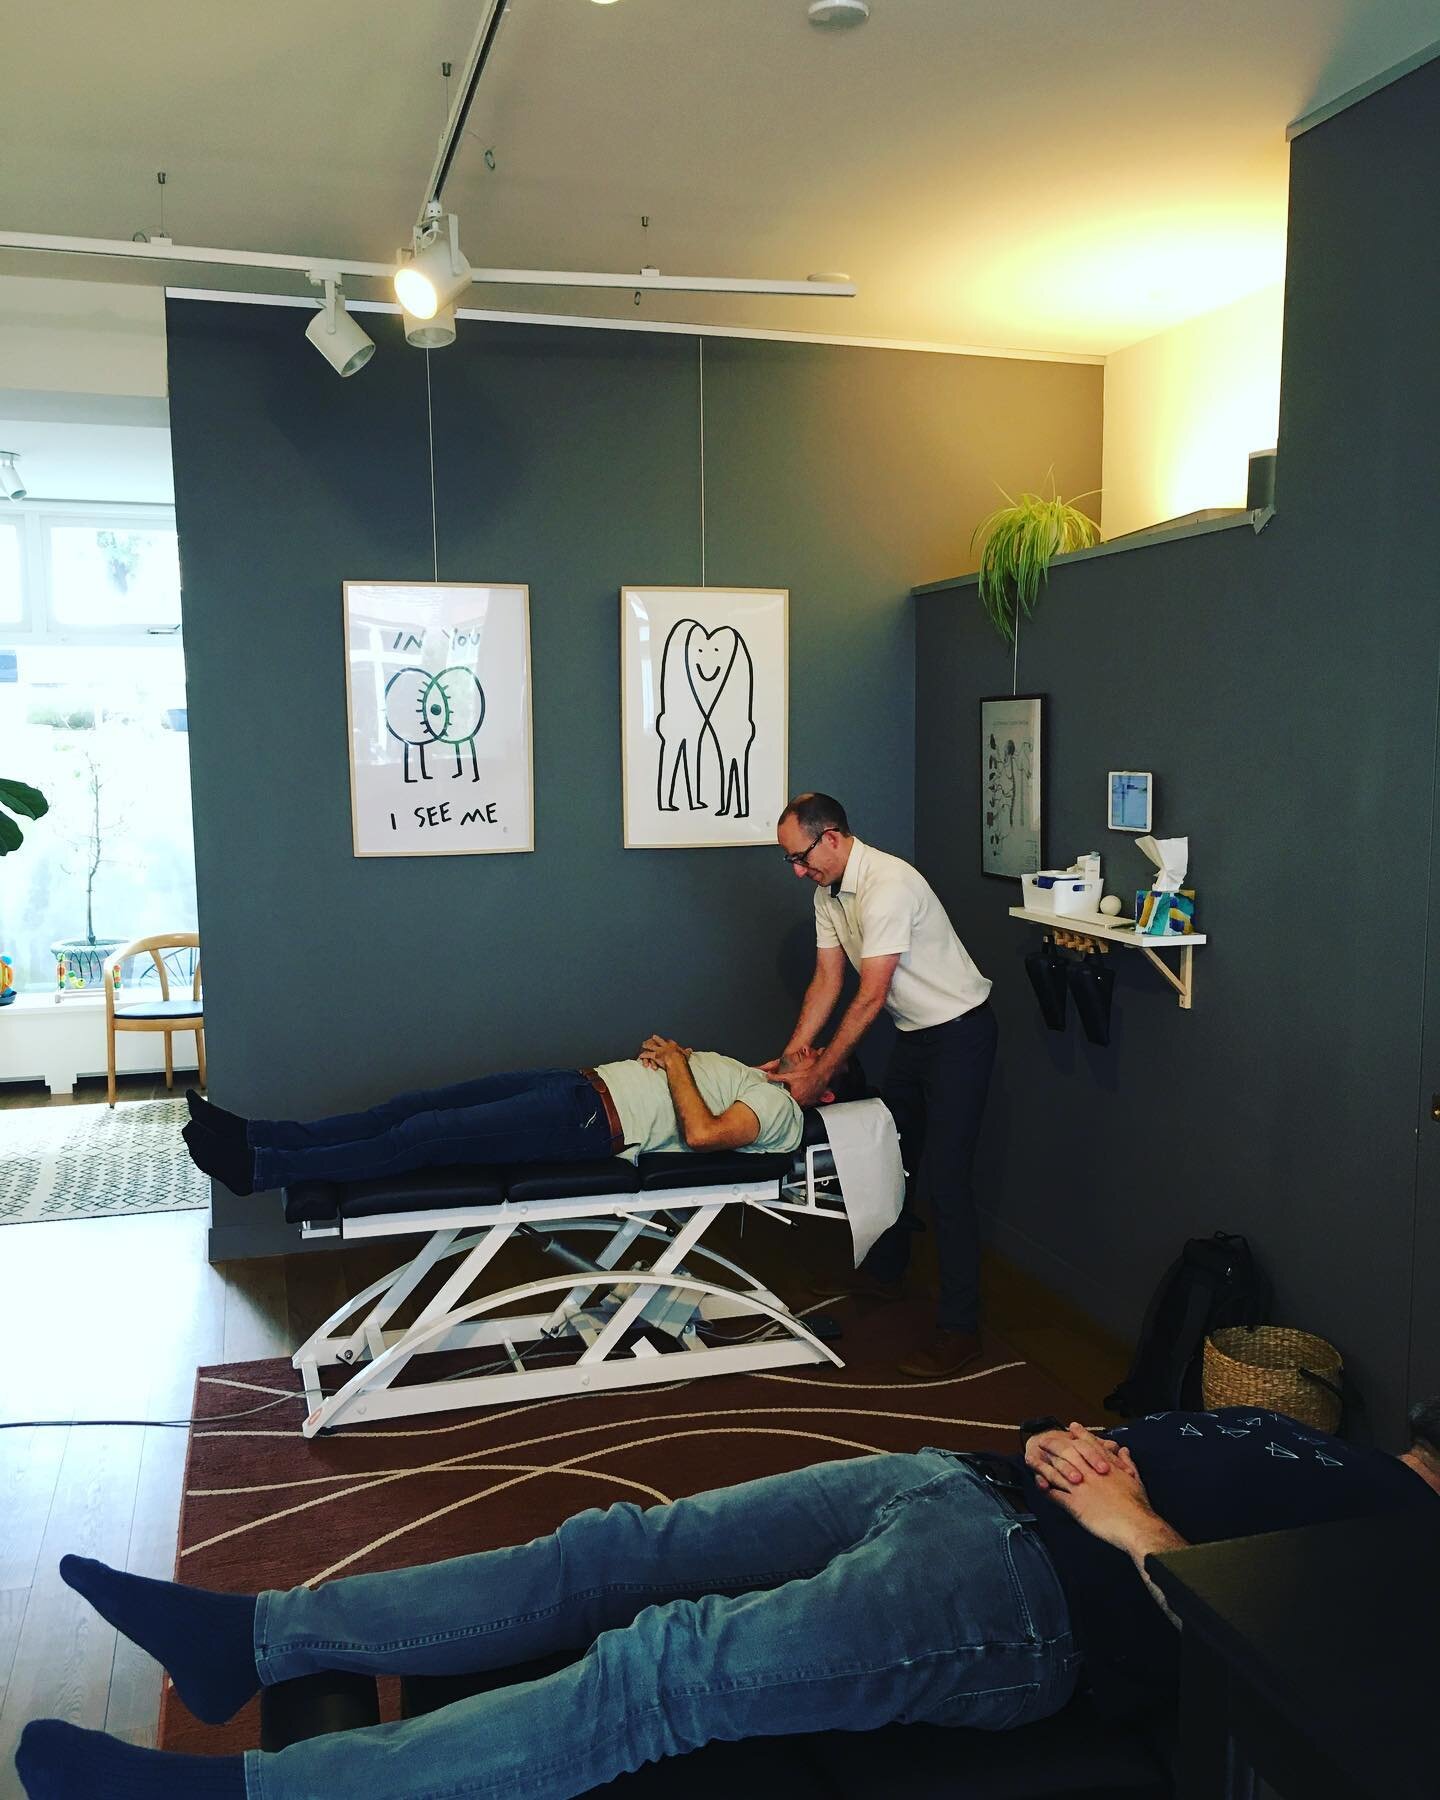 Best start of the week! Getting aligned and ready to Glow! 
Reasons some clients visited us today:
- Improving mobility
- Neck tension 
- Overall health
- Training for marathon
- Pregnancy

#chiropractic #amsterdam #health #innate #workhardplayhard